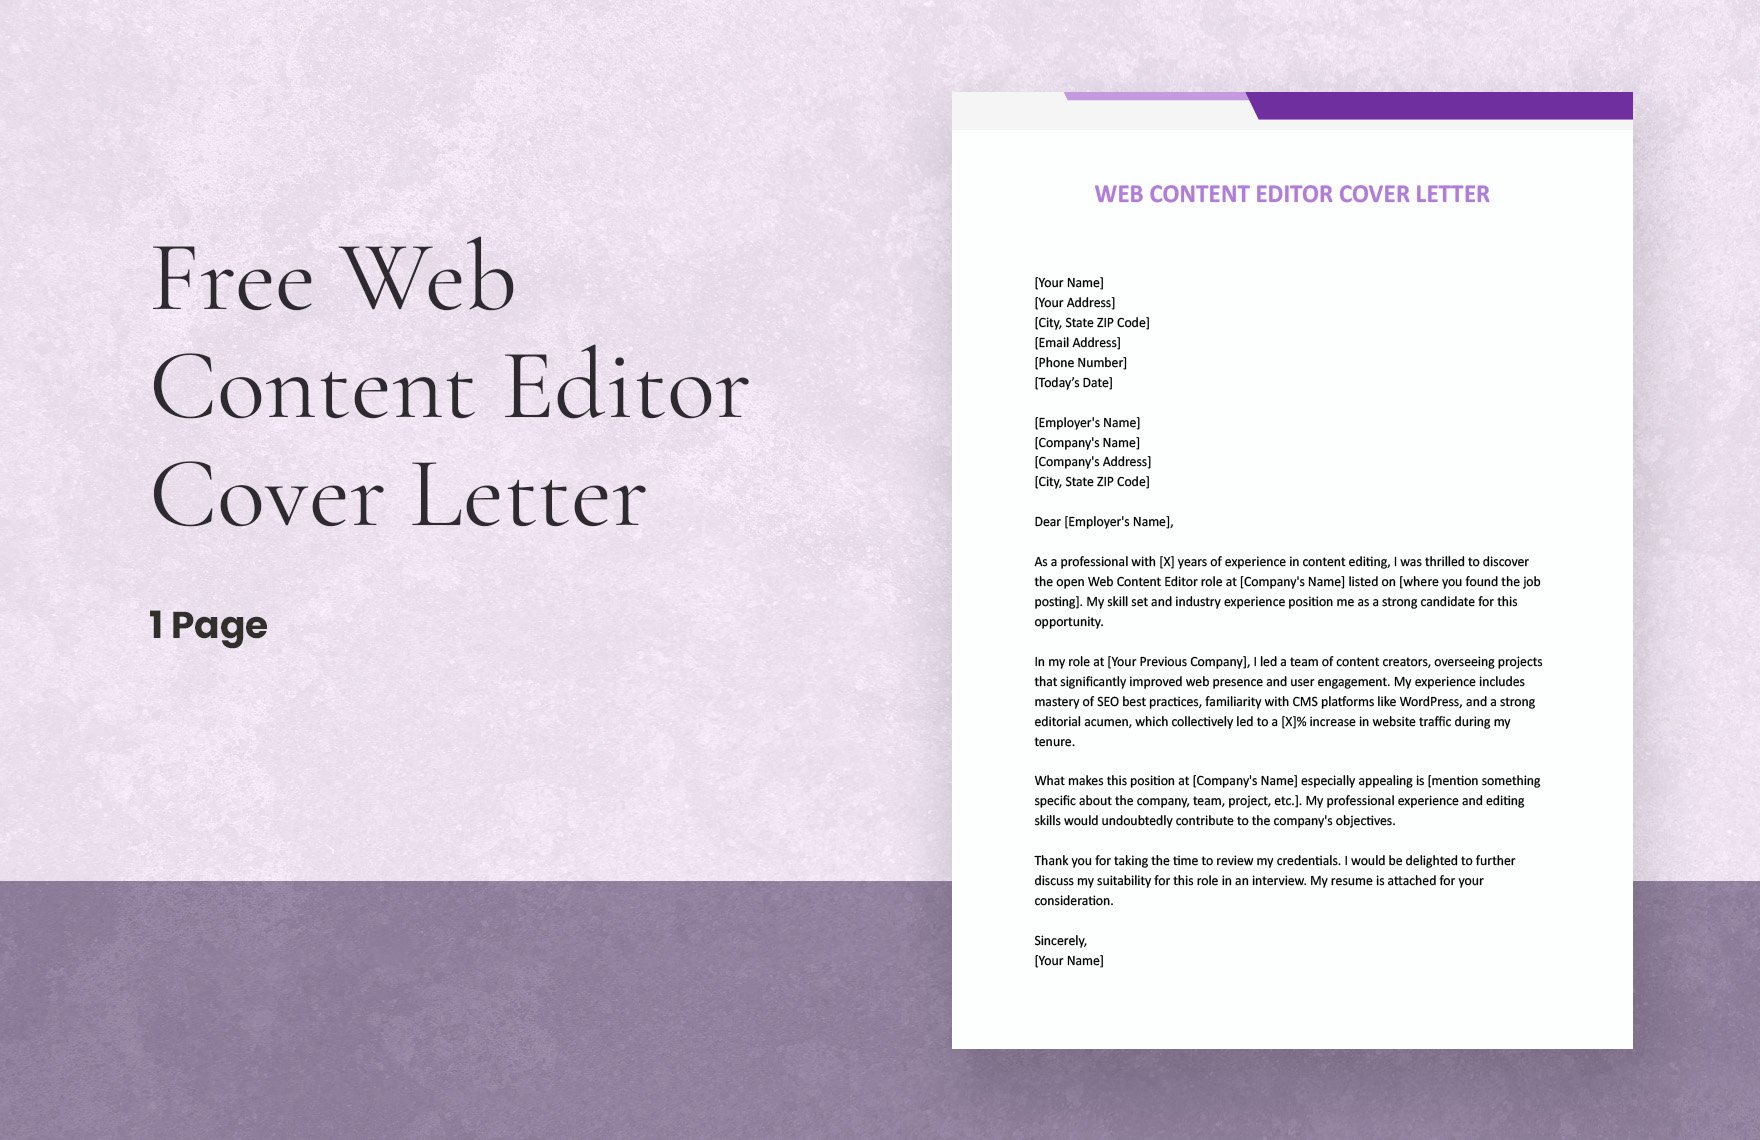 Web Content Editor Cover Letter